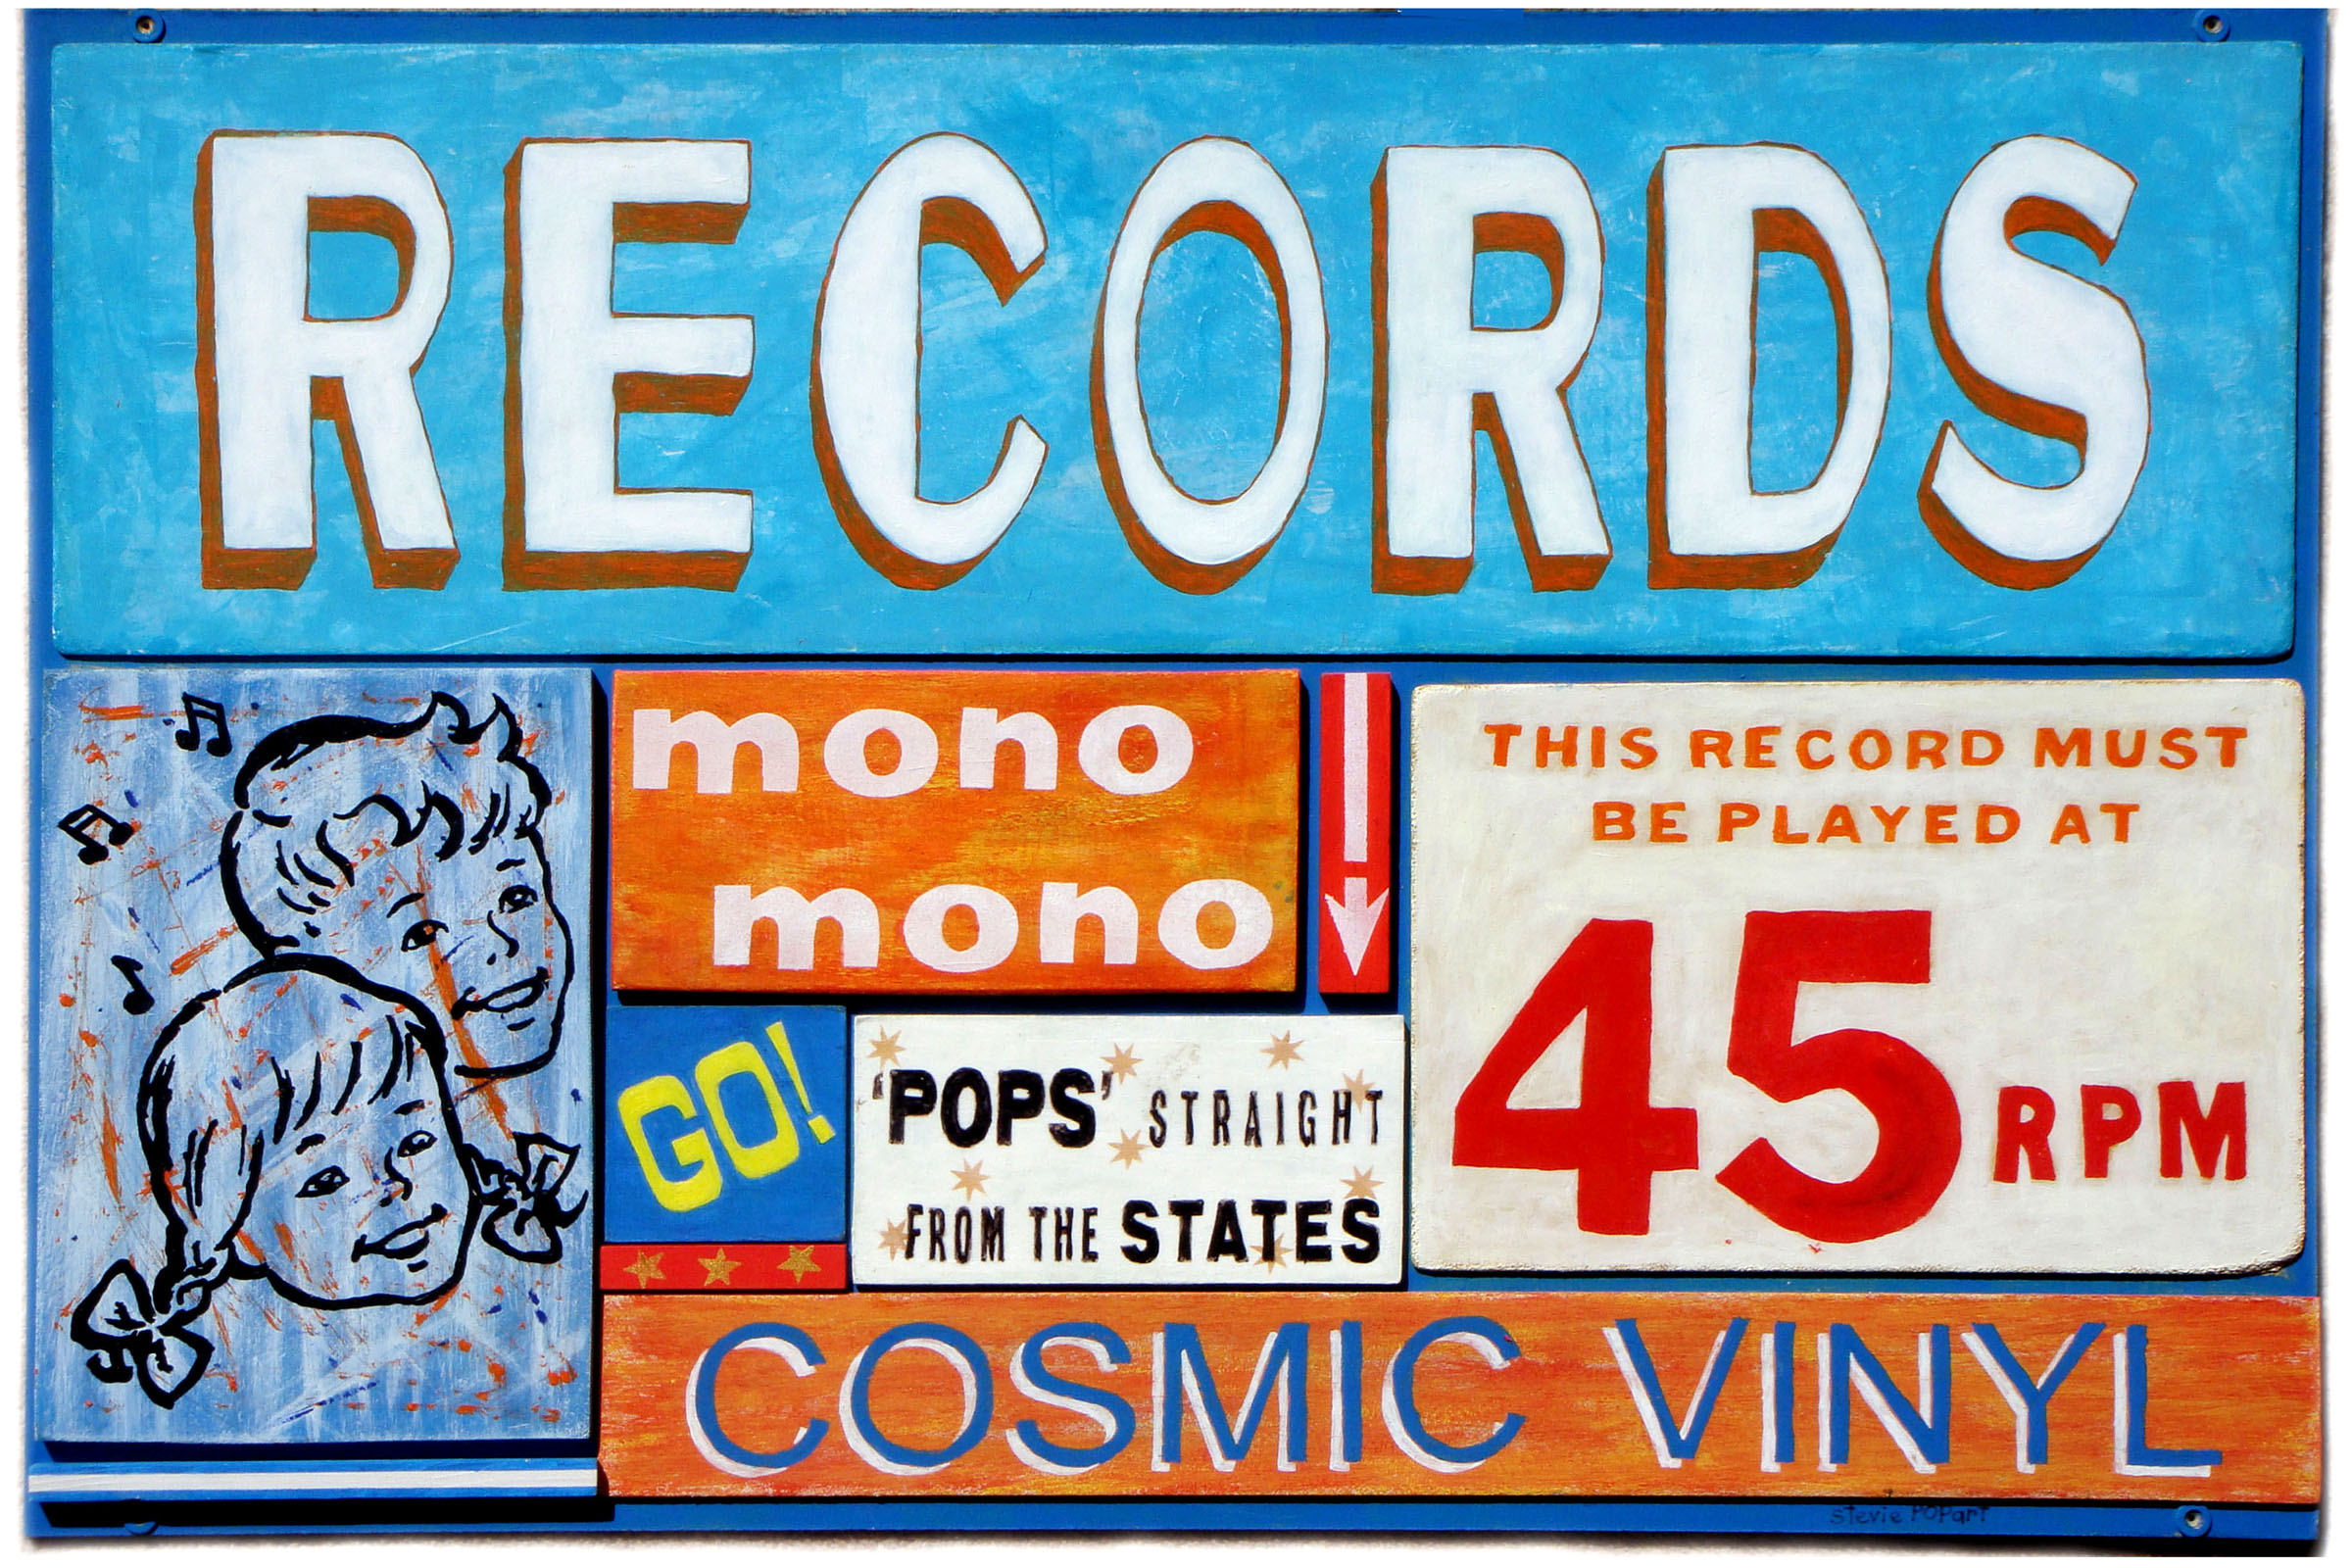 THIS RECORD MUST BE PLAYED<br>Acrylic paint on Plywood<br>80 x 53.5cm